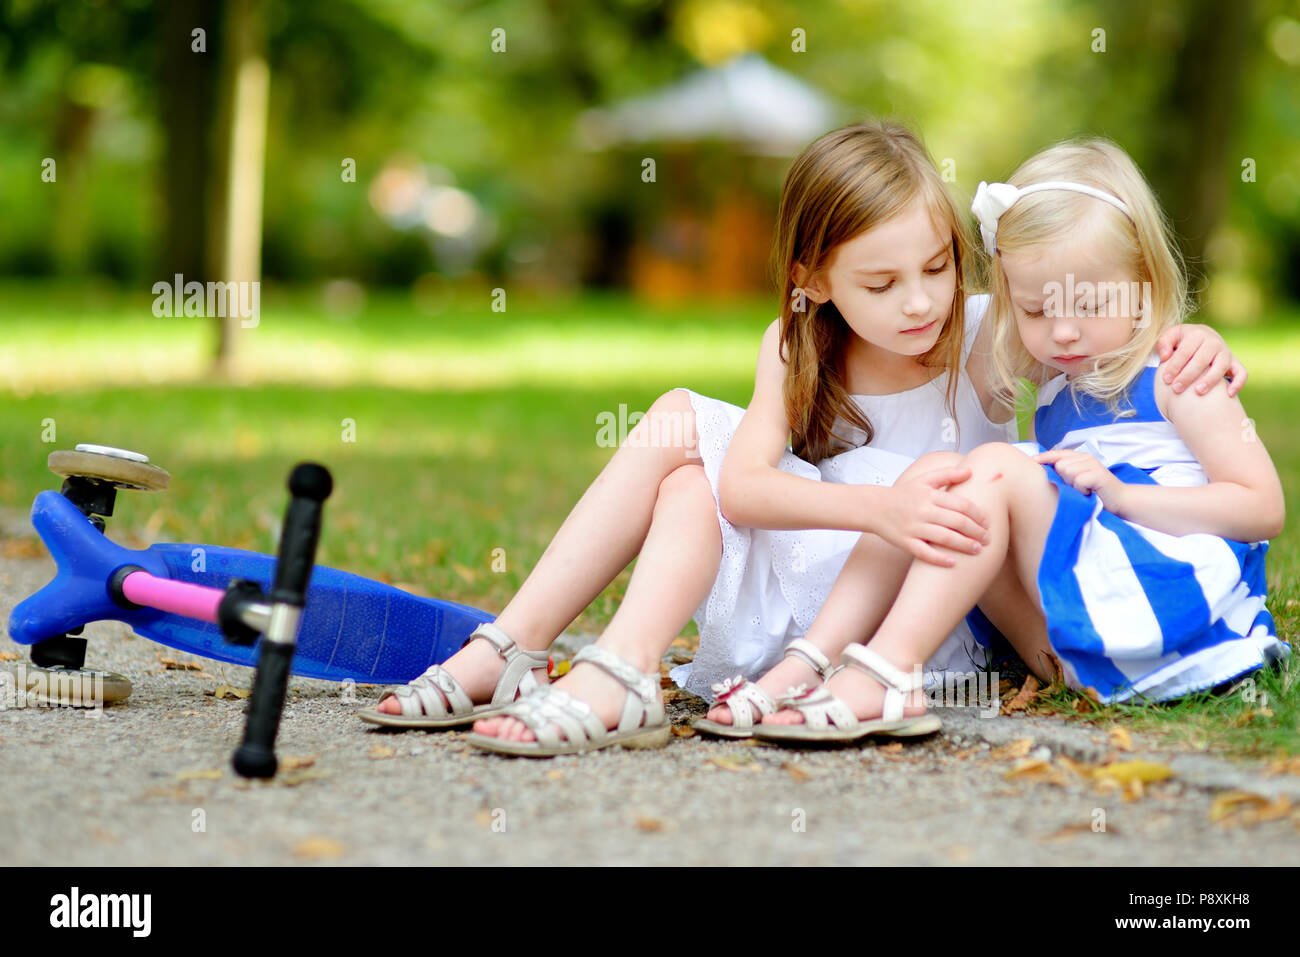 Little girl comforting her sister after she fell while riding her scooter at summer park Stock Photo